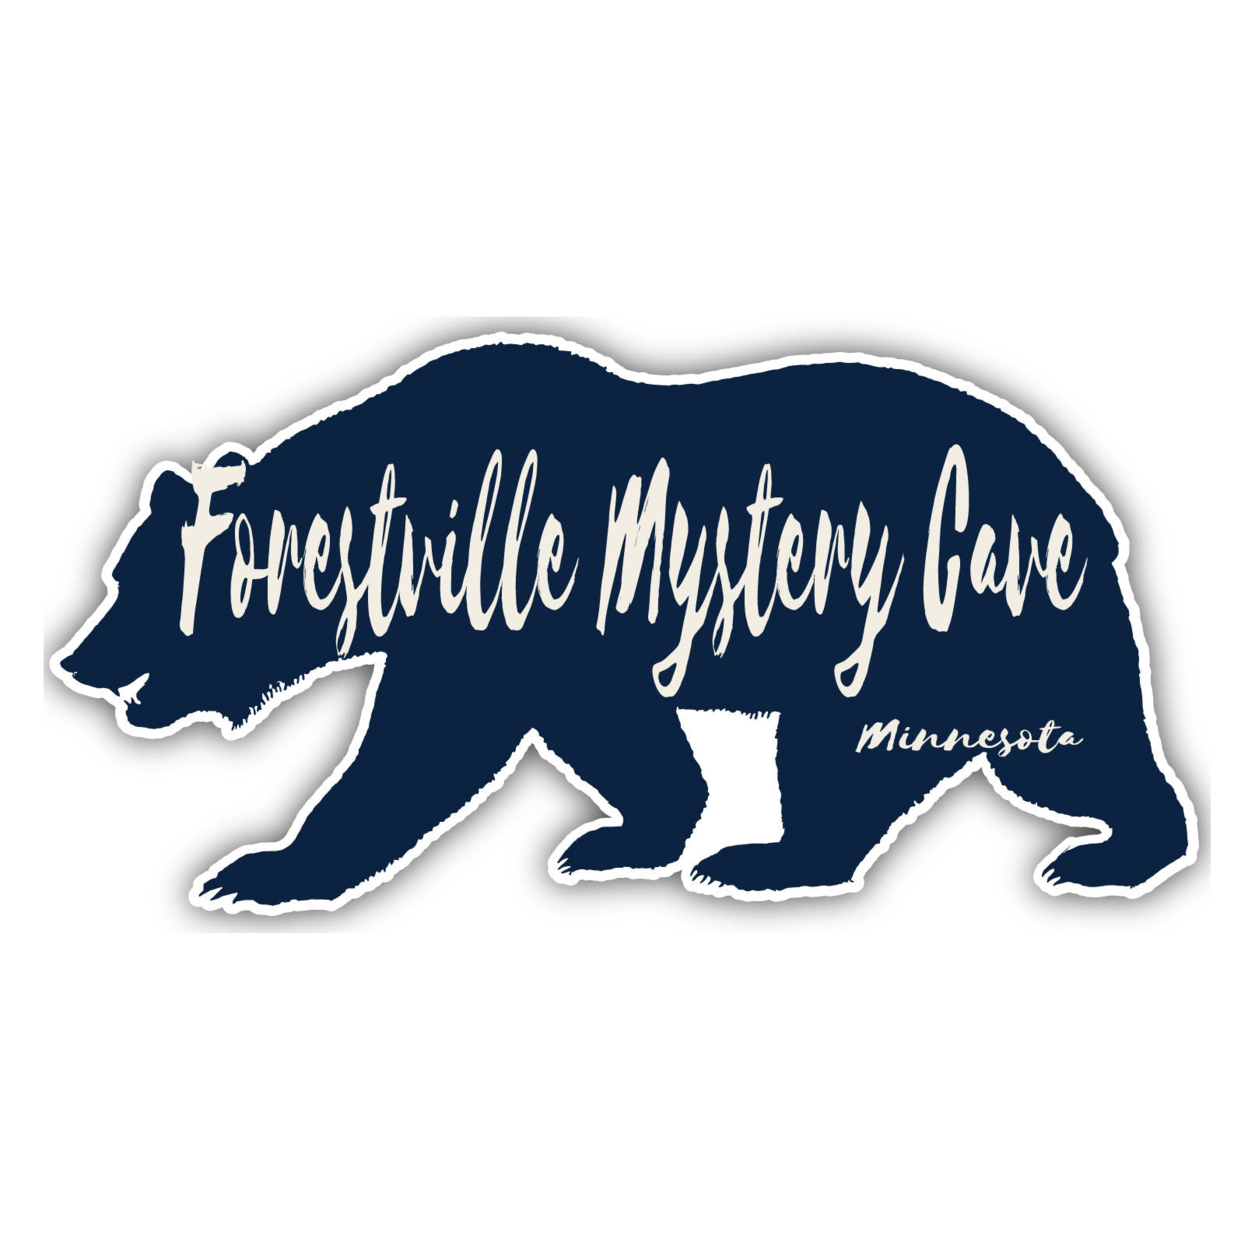 Forestville Mystery Cave Minnesota Souvenir Decorative Stickers (Choose Theme And Size) - 4-Pack, 12-Inch, Bear